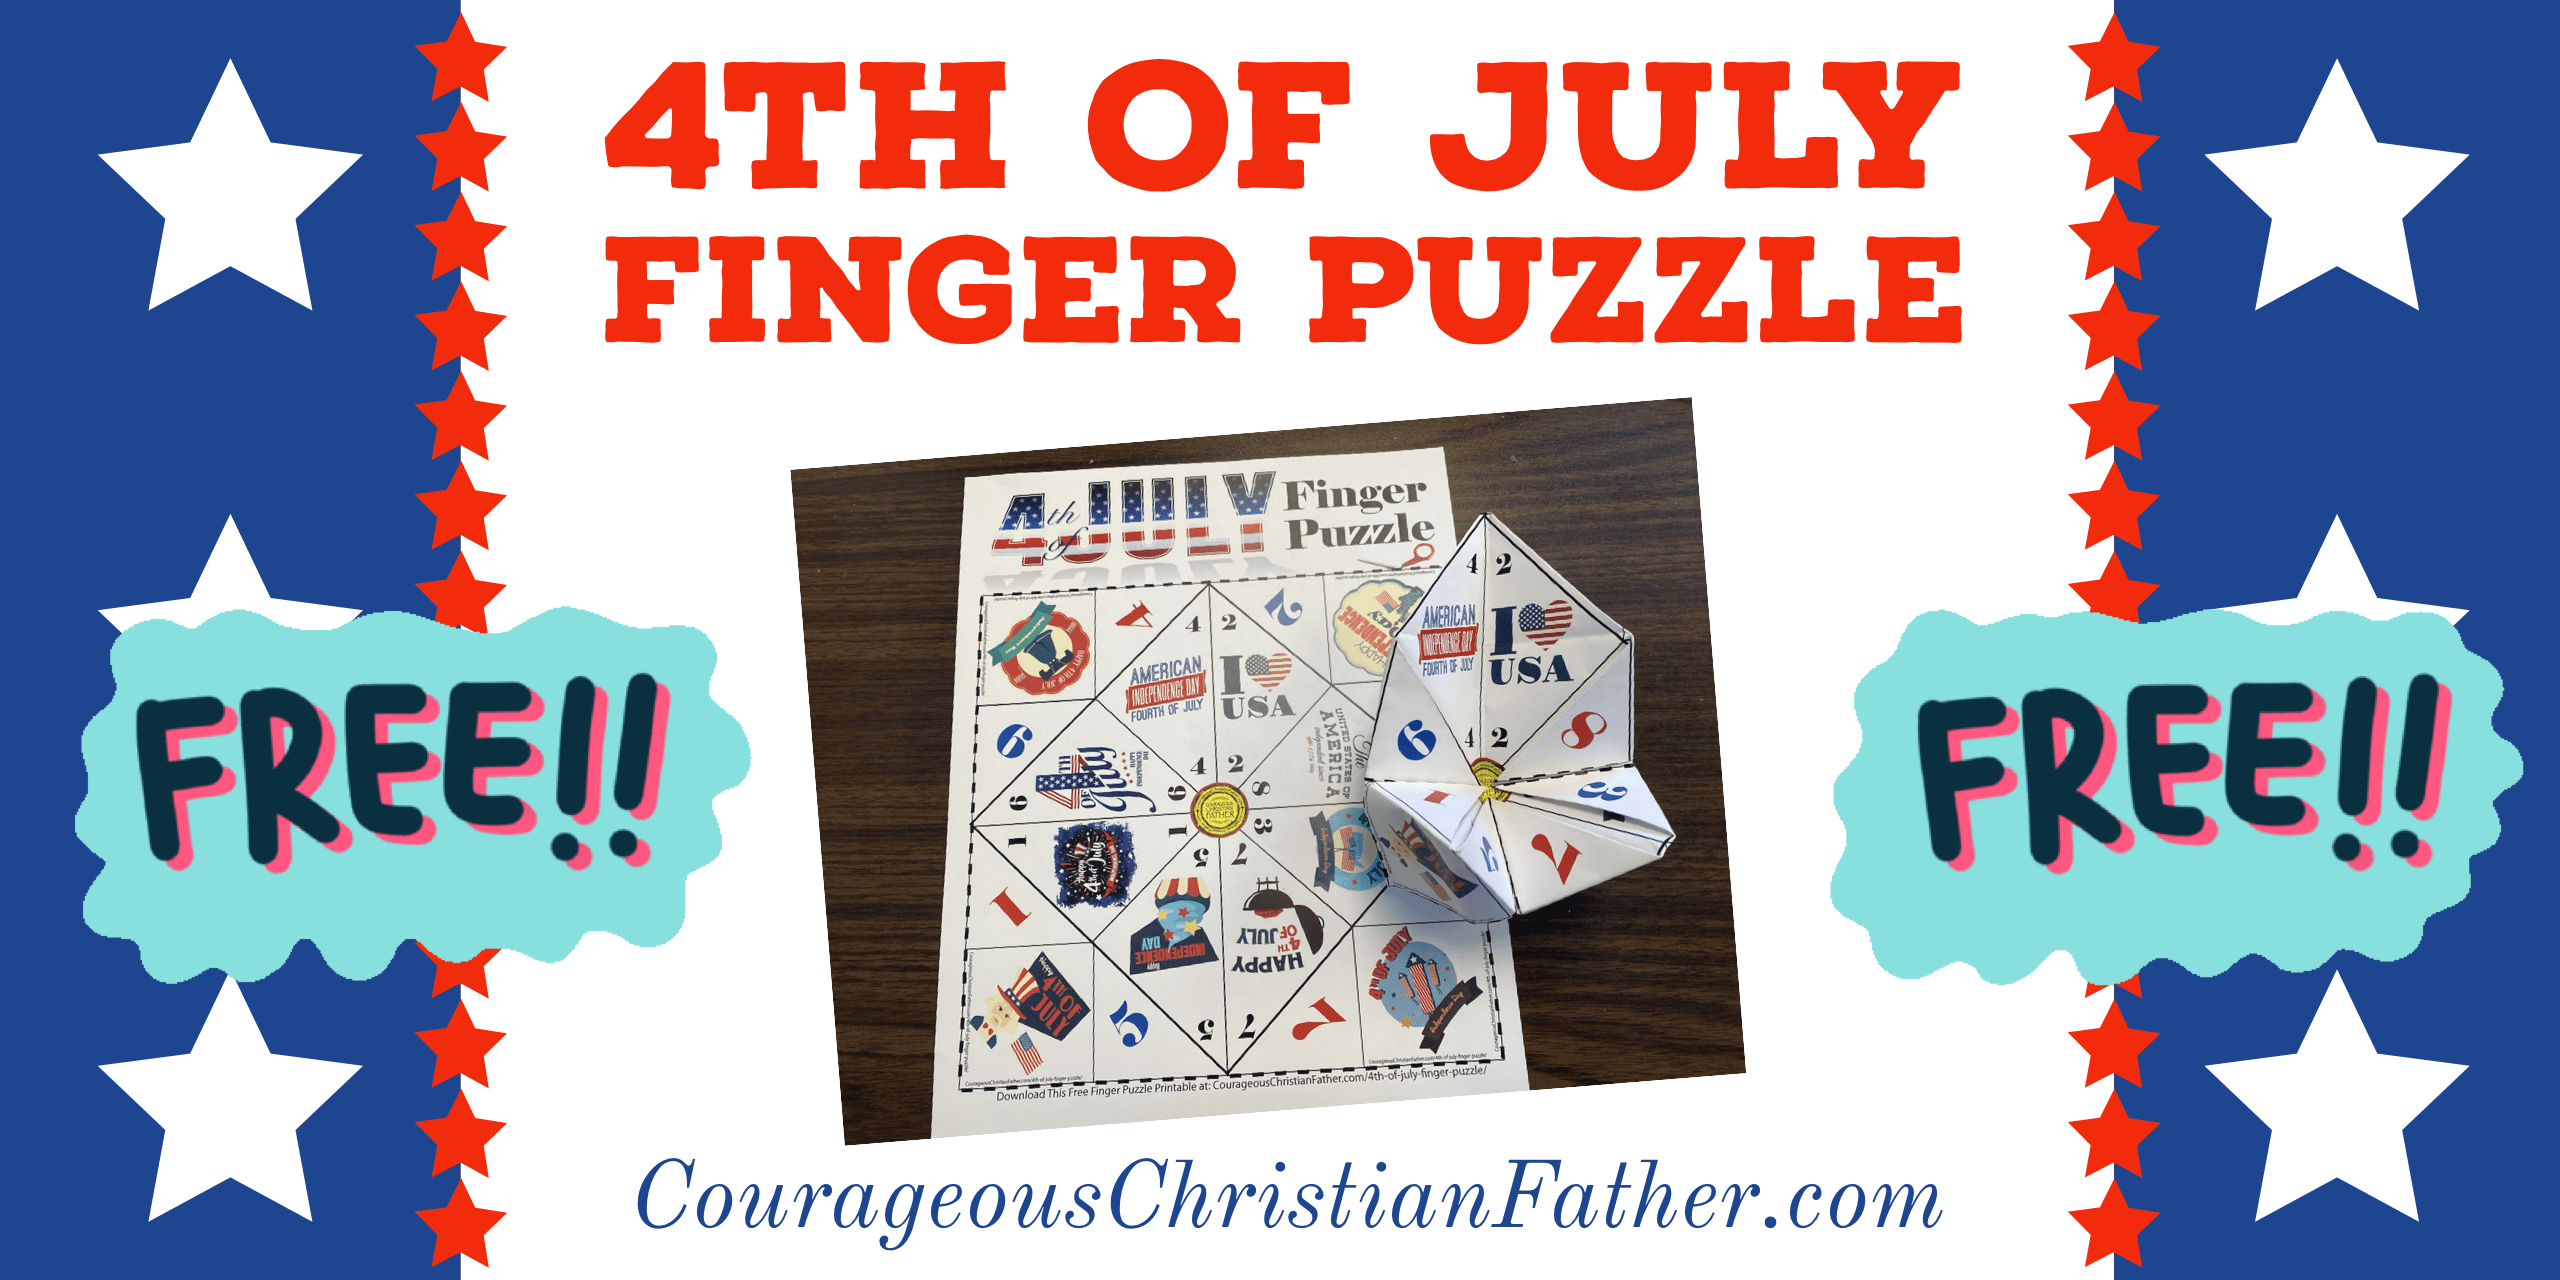 4th of July Finger Puzzle Printable - Here is a fun free finger puzzle printable for Independence Day (4th of July). #4thofJuly #IndependenceDay